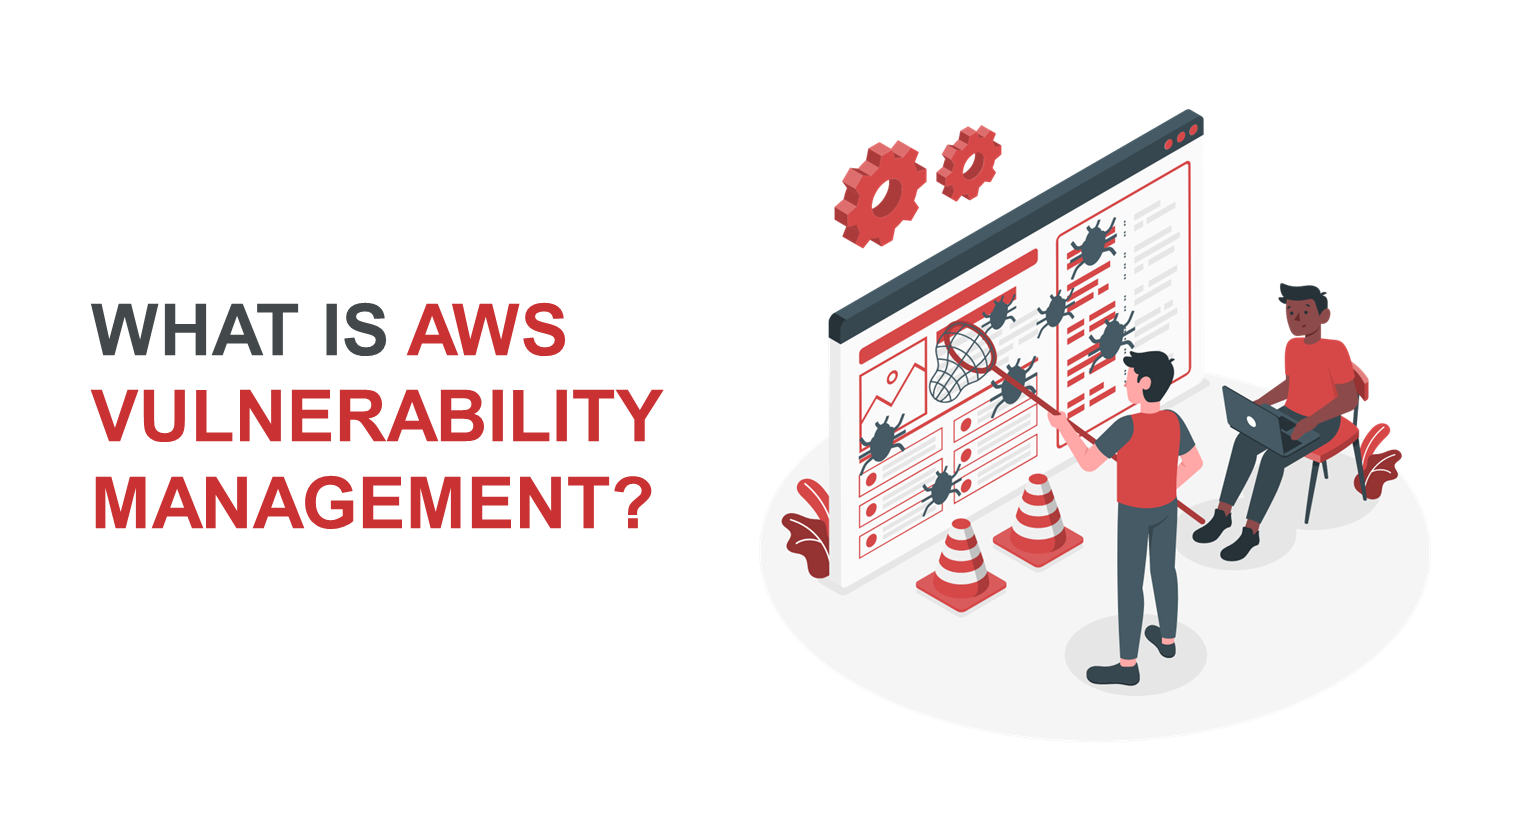 What Is AWS Vulnerability Management?